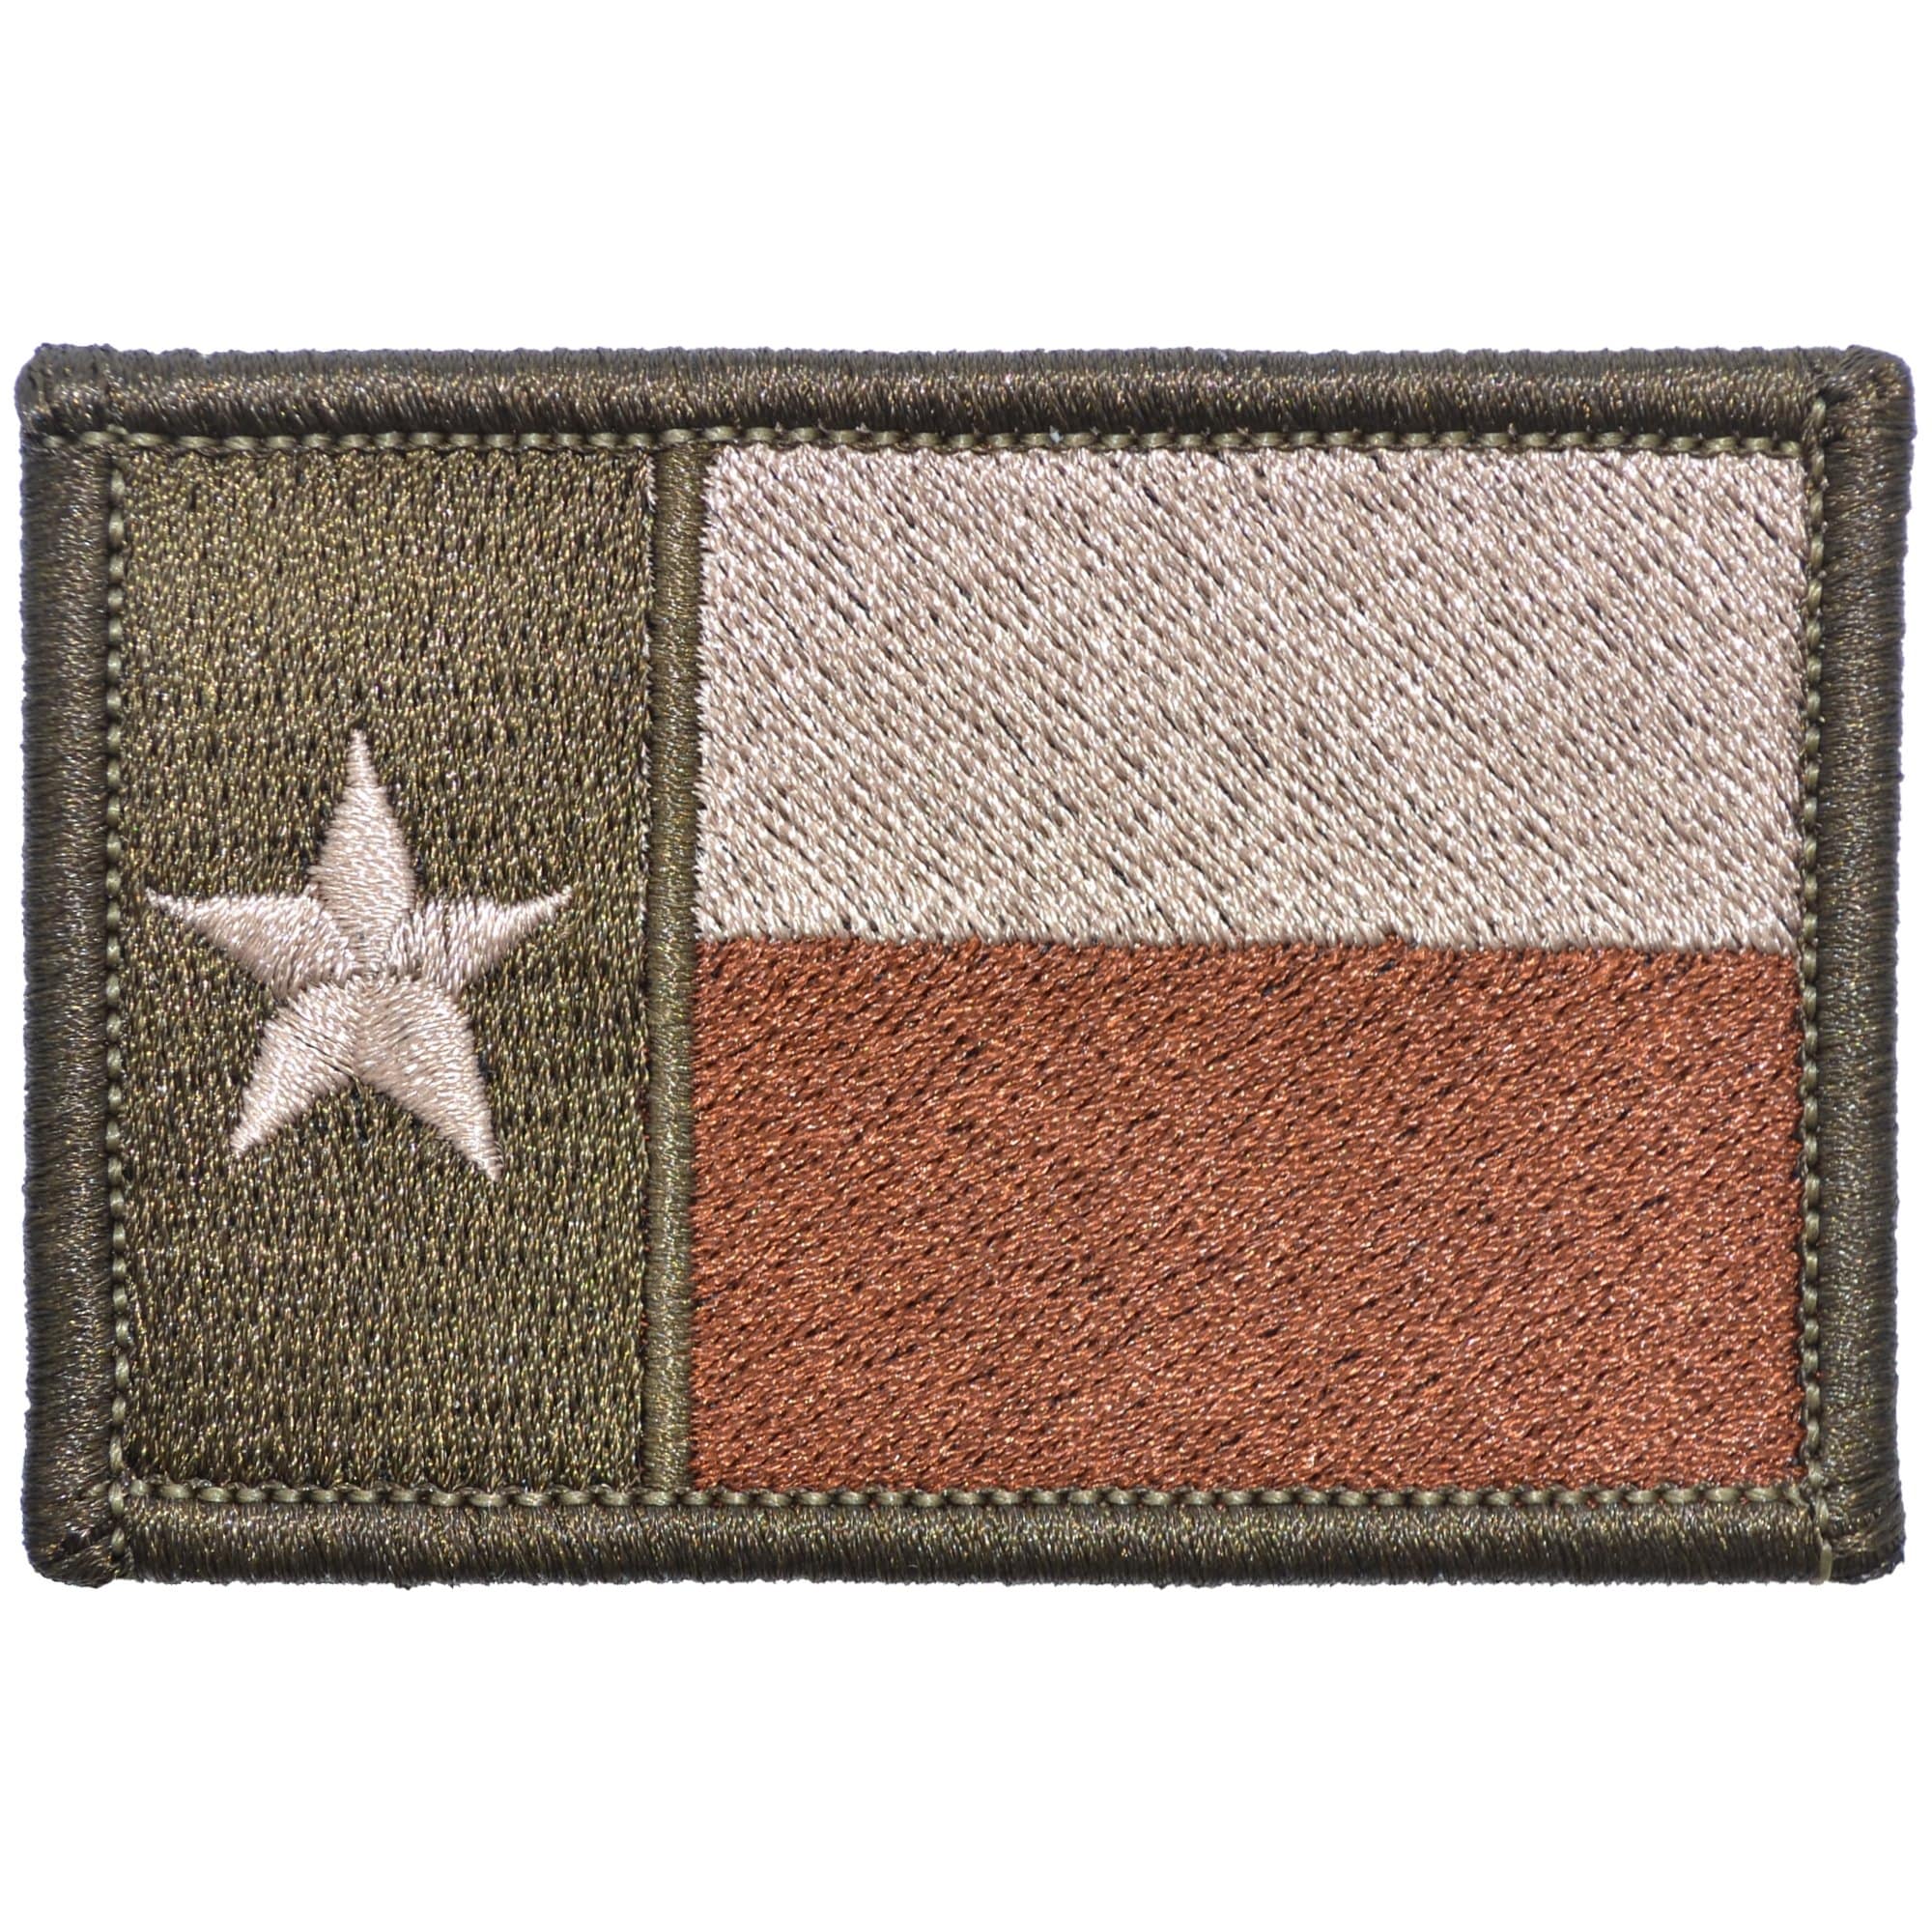 Tactical Gear Junkie Patches Coyote Brown Texas State Flag - 2x3 Patch